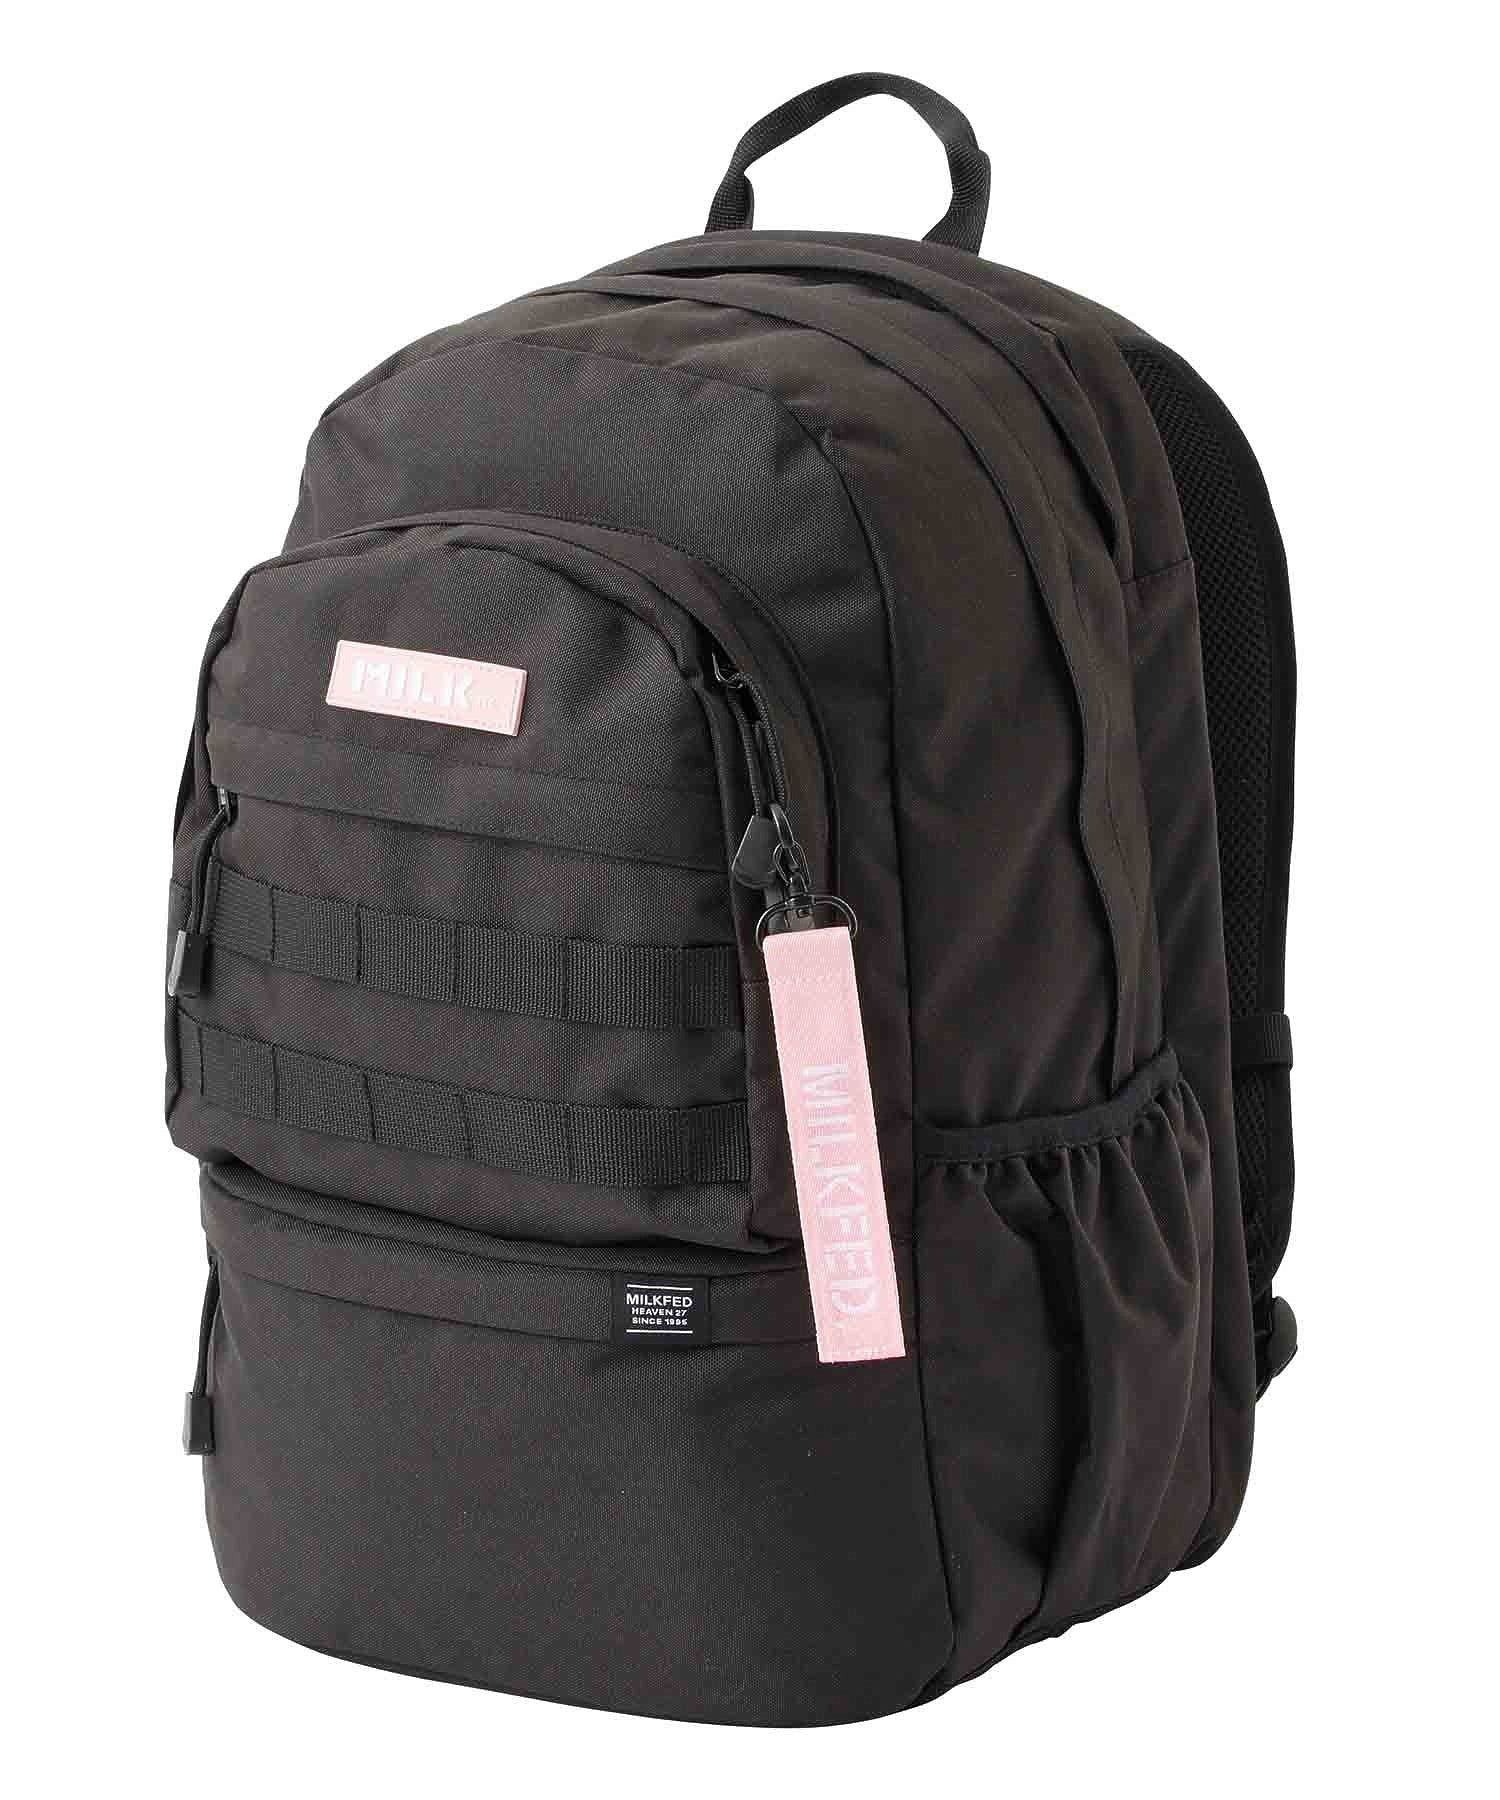 ACTIVE MOLLE BACKPACK MILKFED. – calif